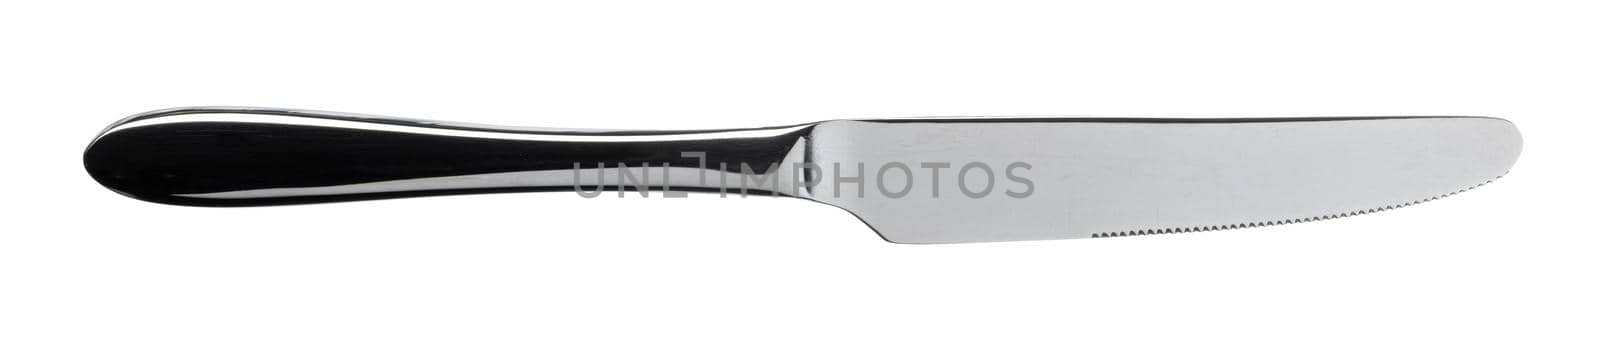 Silver knife silverware isolated on white background. close up.